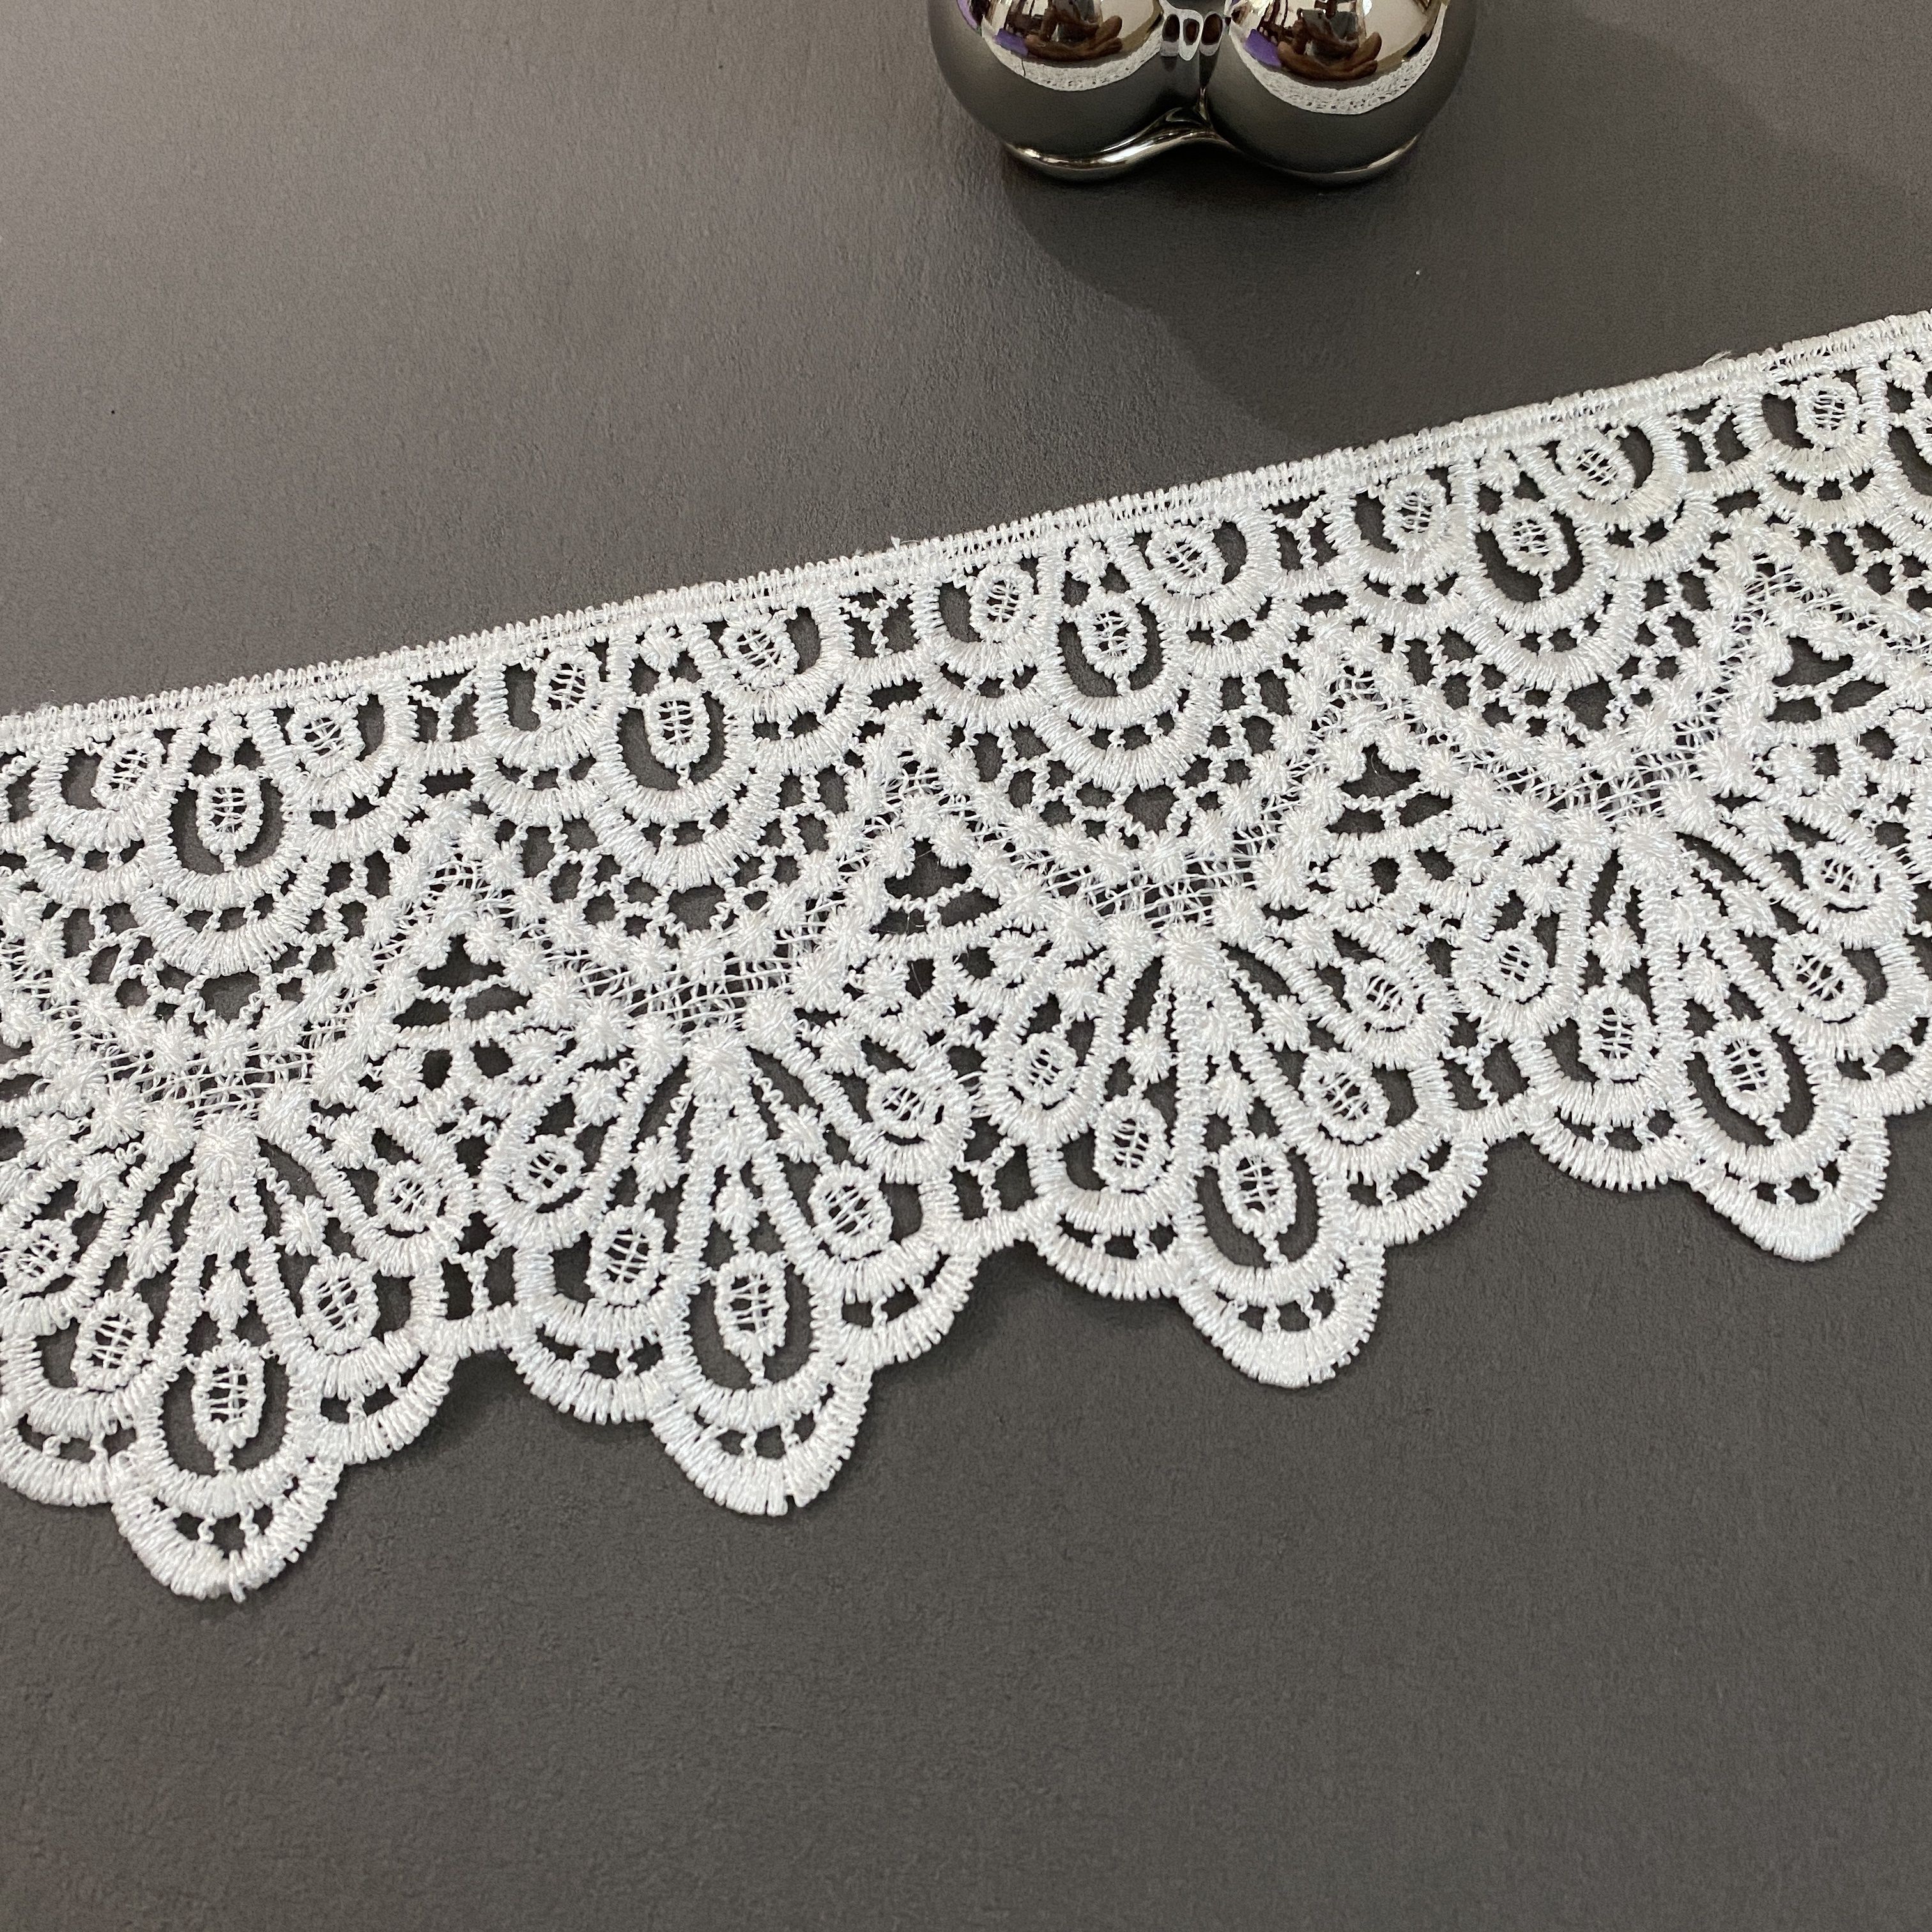 Simplicity Trim, White 1 1/4 inch Embroidered Lace Mesh with Scallop Edge  Trim Great for Apparel, Home Decorating, and Crafts, 1 Yard, 1 Each 